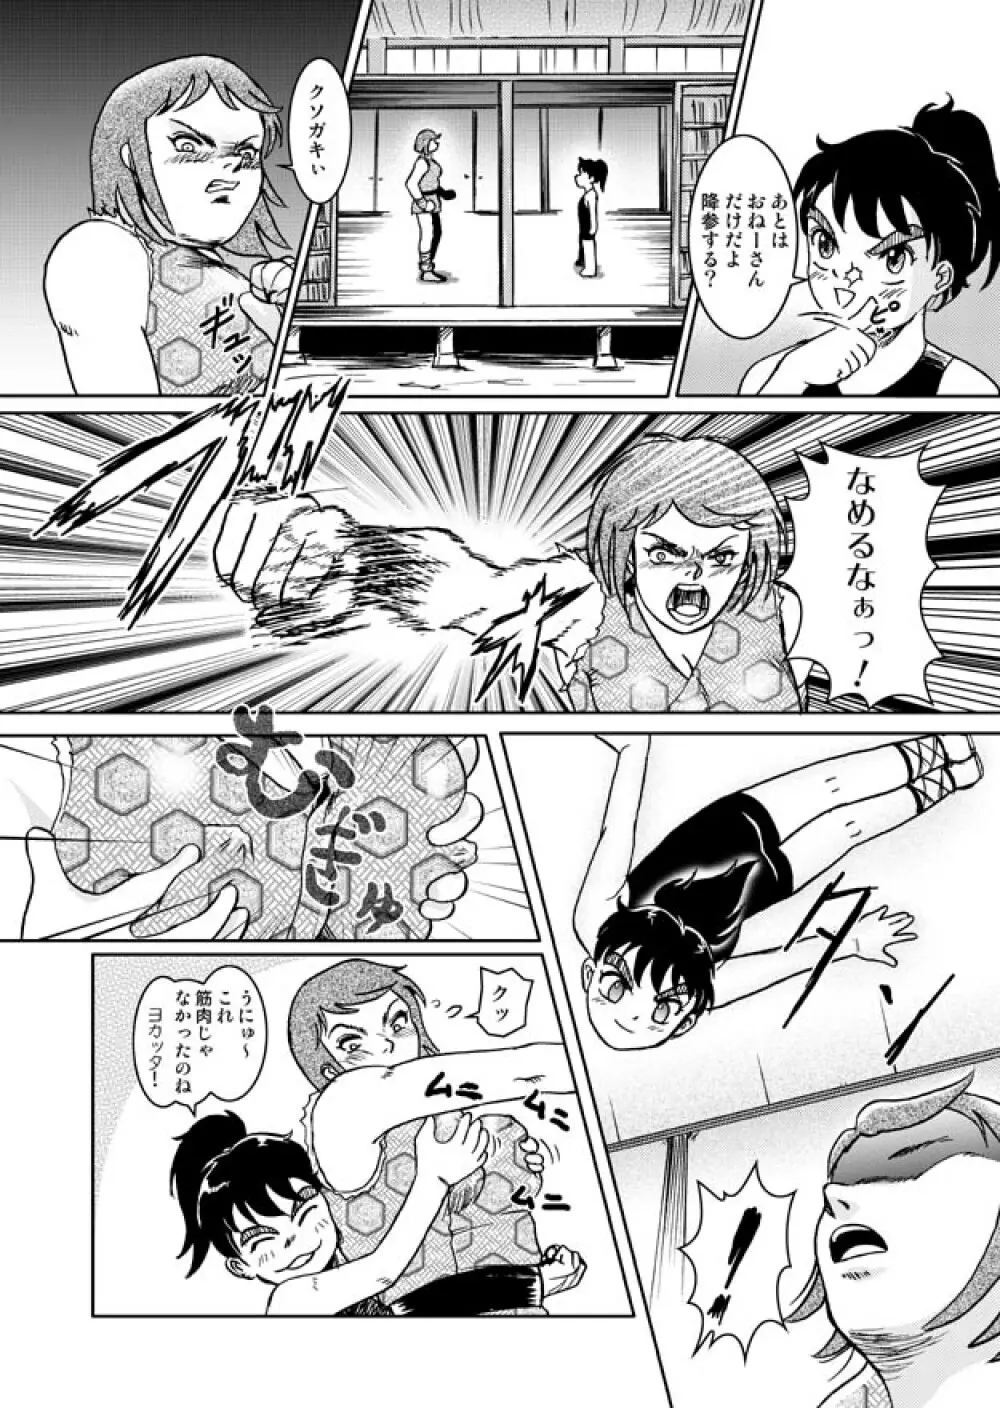 Same-themed manga about kid fighting female ninjas from japanese imageboard. Page.11